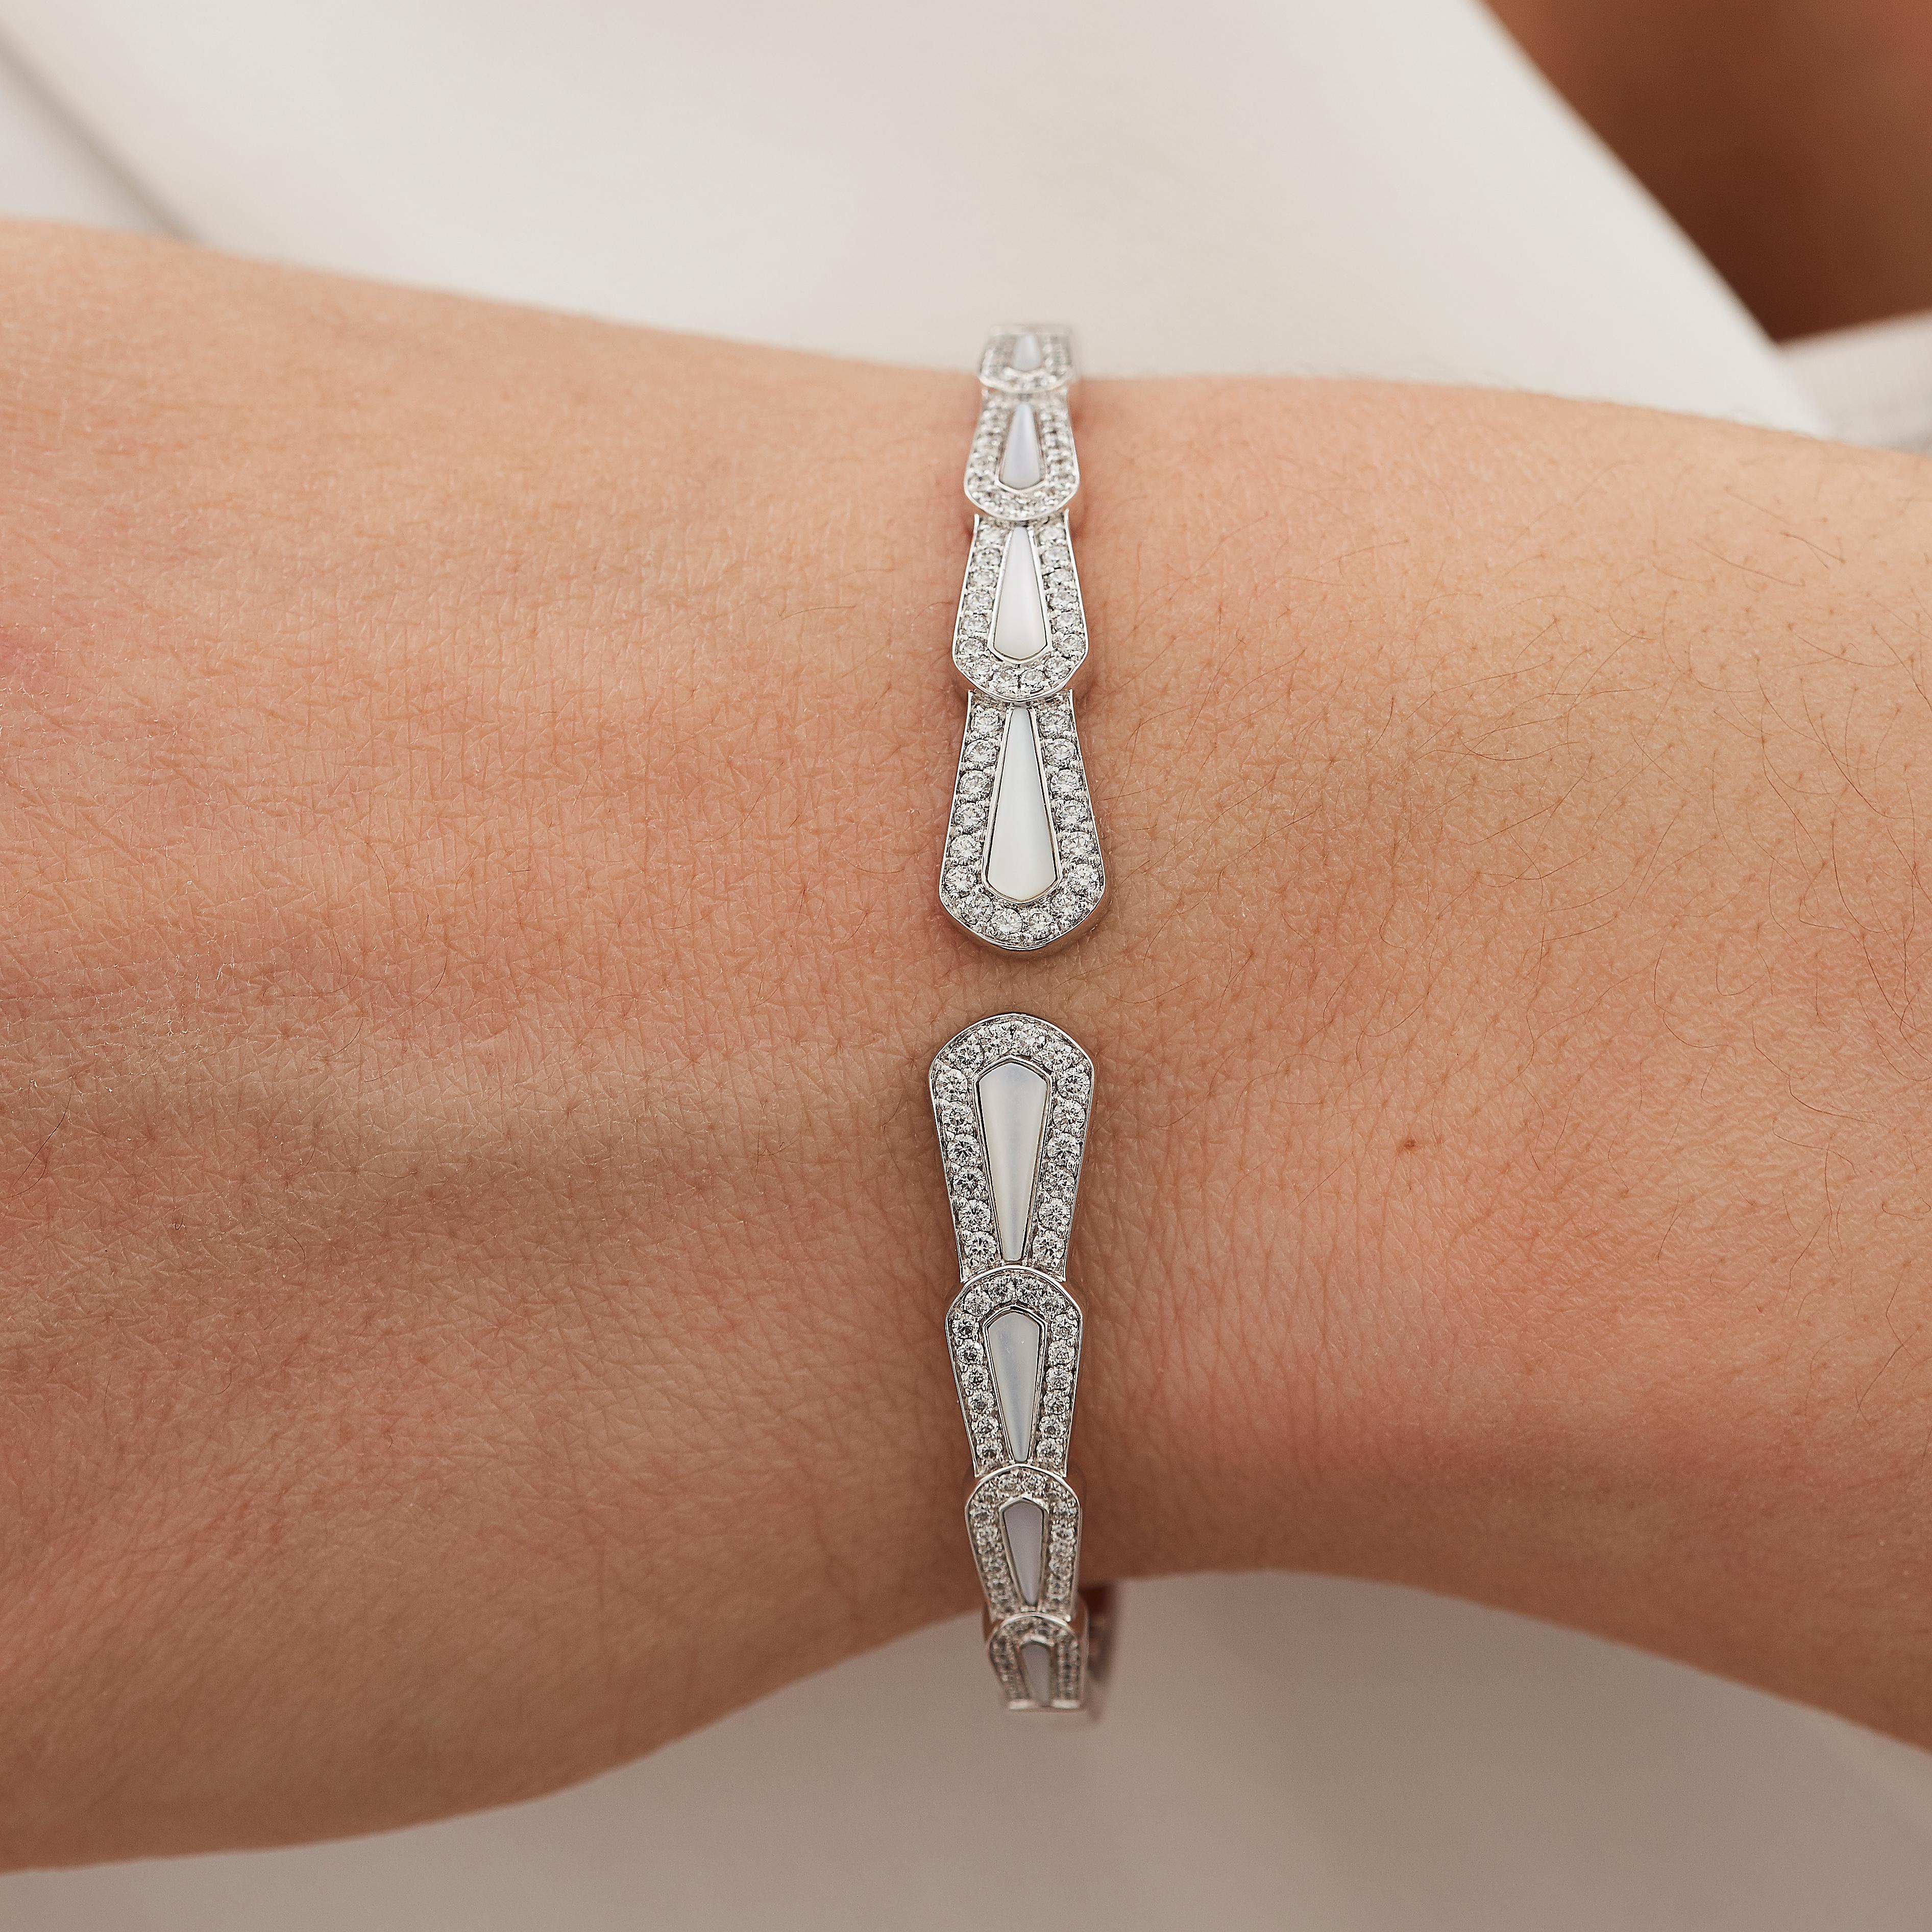 A House of Garrard 18 karat white gold bangle from the 'Fanfare' collection, set with round white diamonds and mother of pearls.

8 mother of pearl weighing: 1.12cts
123 round white diamonds weighing: 0.87cts

The House of Garrard is the longest